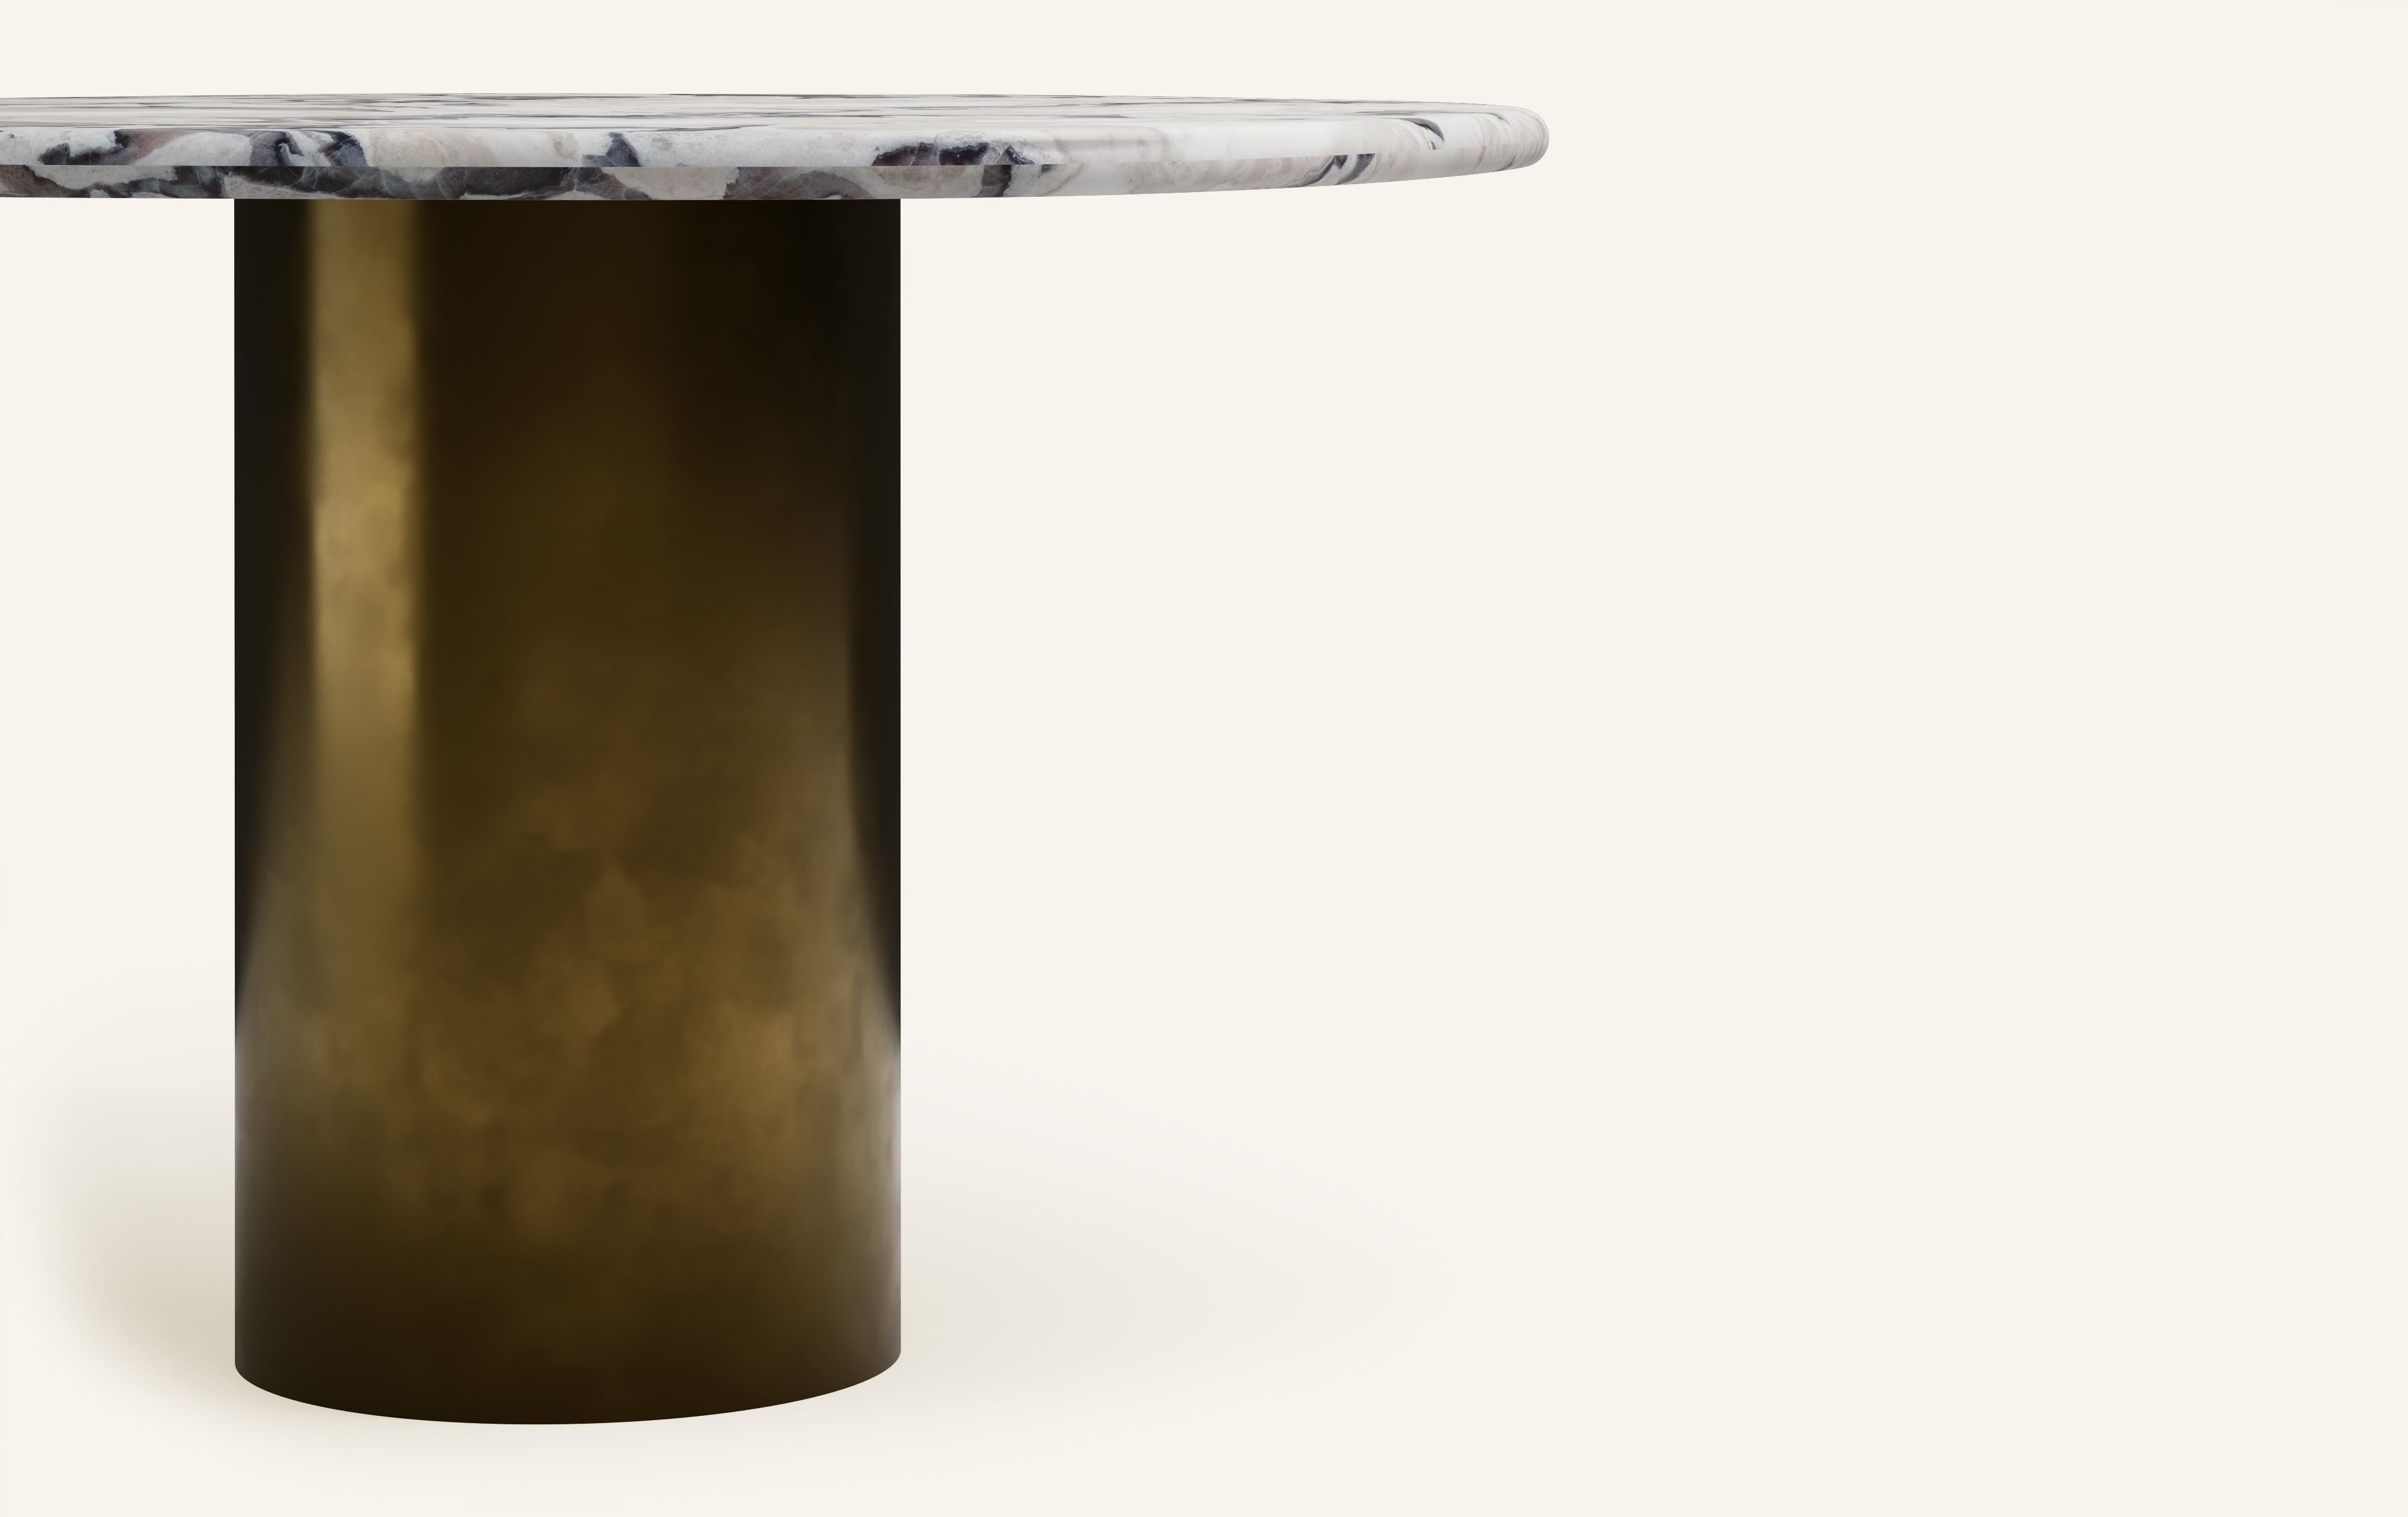 Organic Modern FORM(LA) Lago Round Dining Table 48”L x 48”W x 30”H Oyster Marble & Bronze For Sale